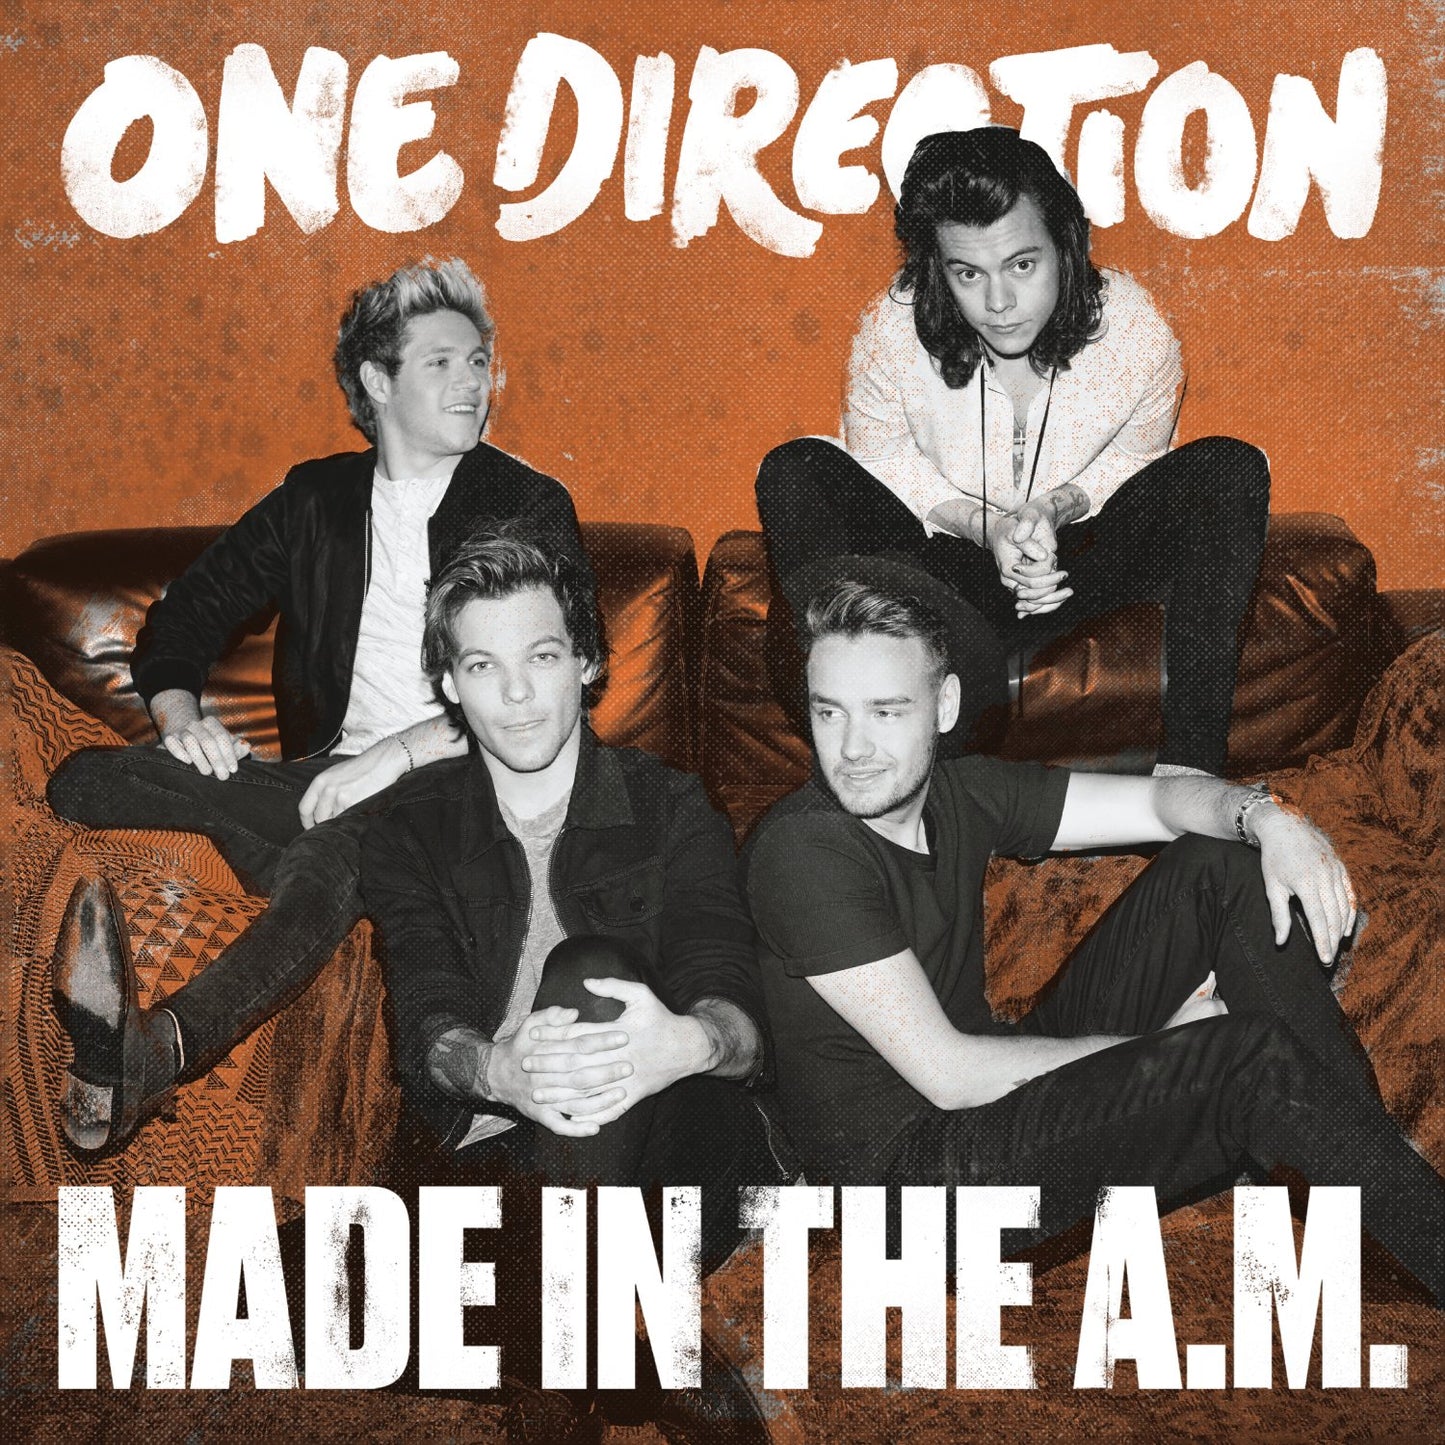 One Direction - Made In The A.M. (Gatefold) (2 LP) - Joco Records